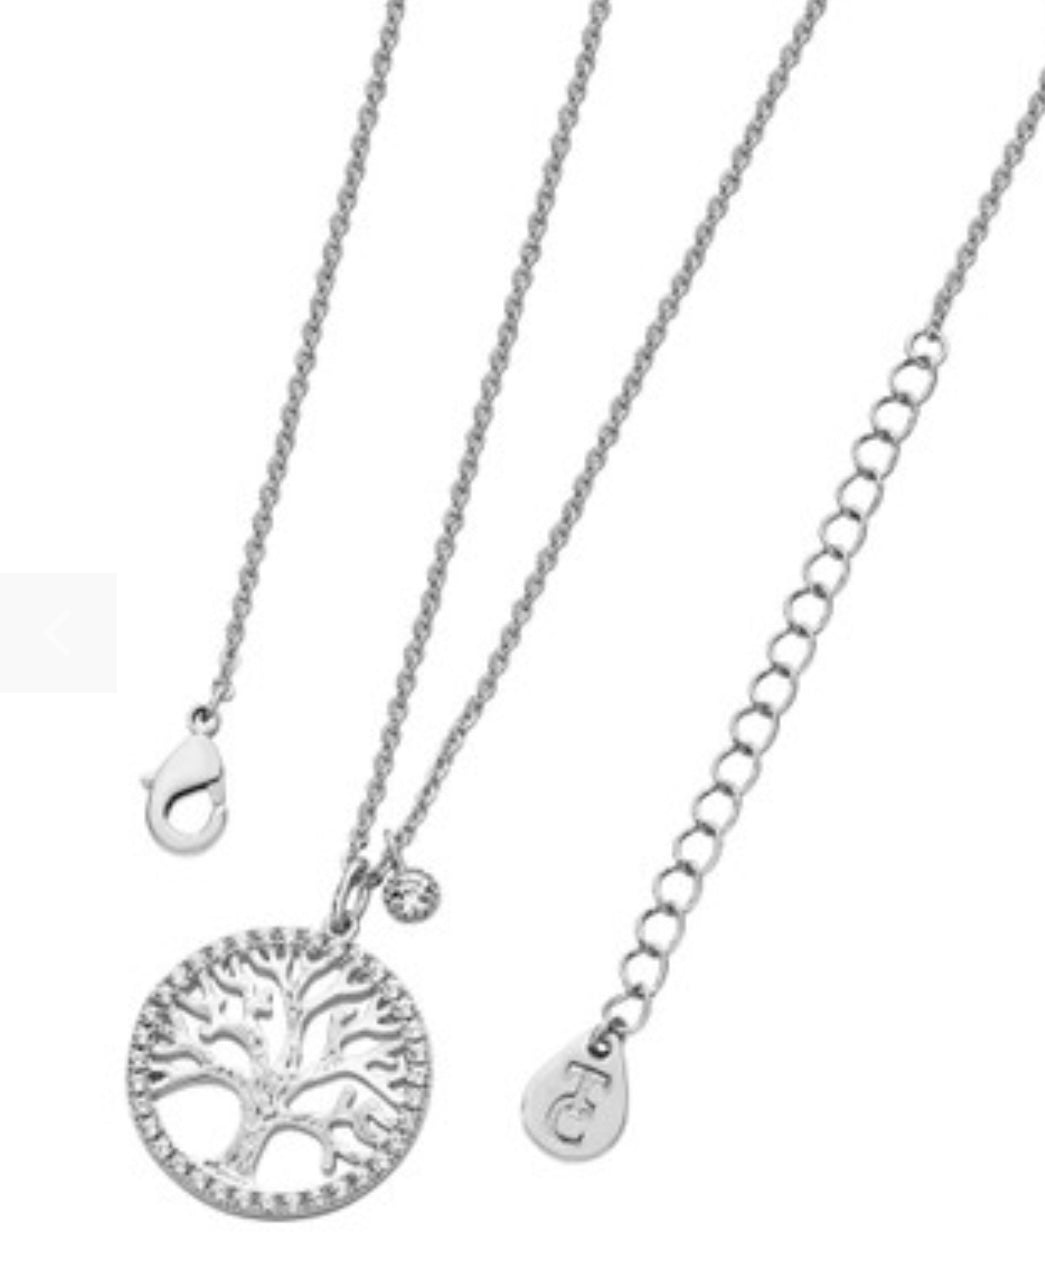 Tipperary Crystal Pendant - Sterling Silver Collection - CZ Surround Tree of Life Pendant